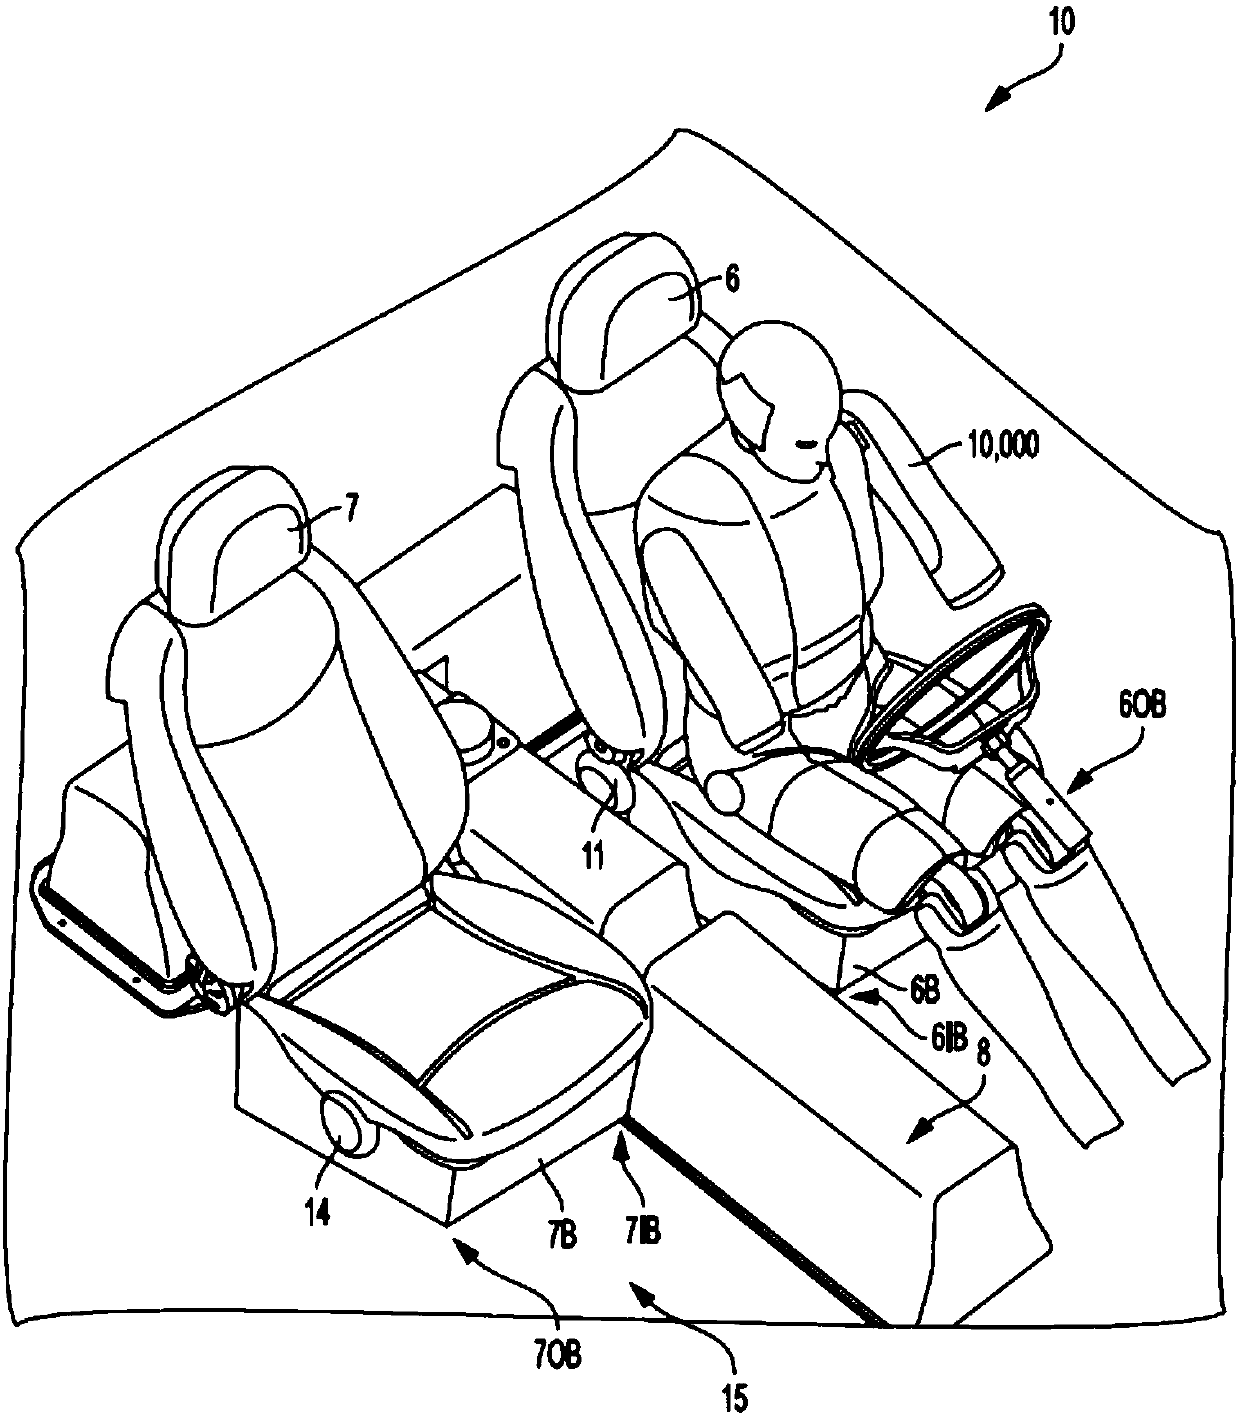 Airbag protection system for vehicle battery packs